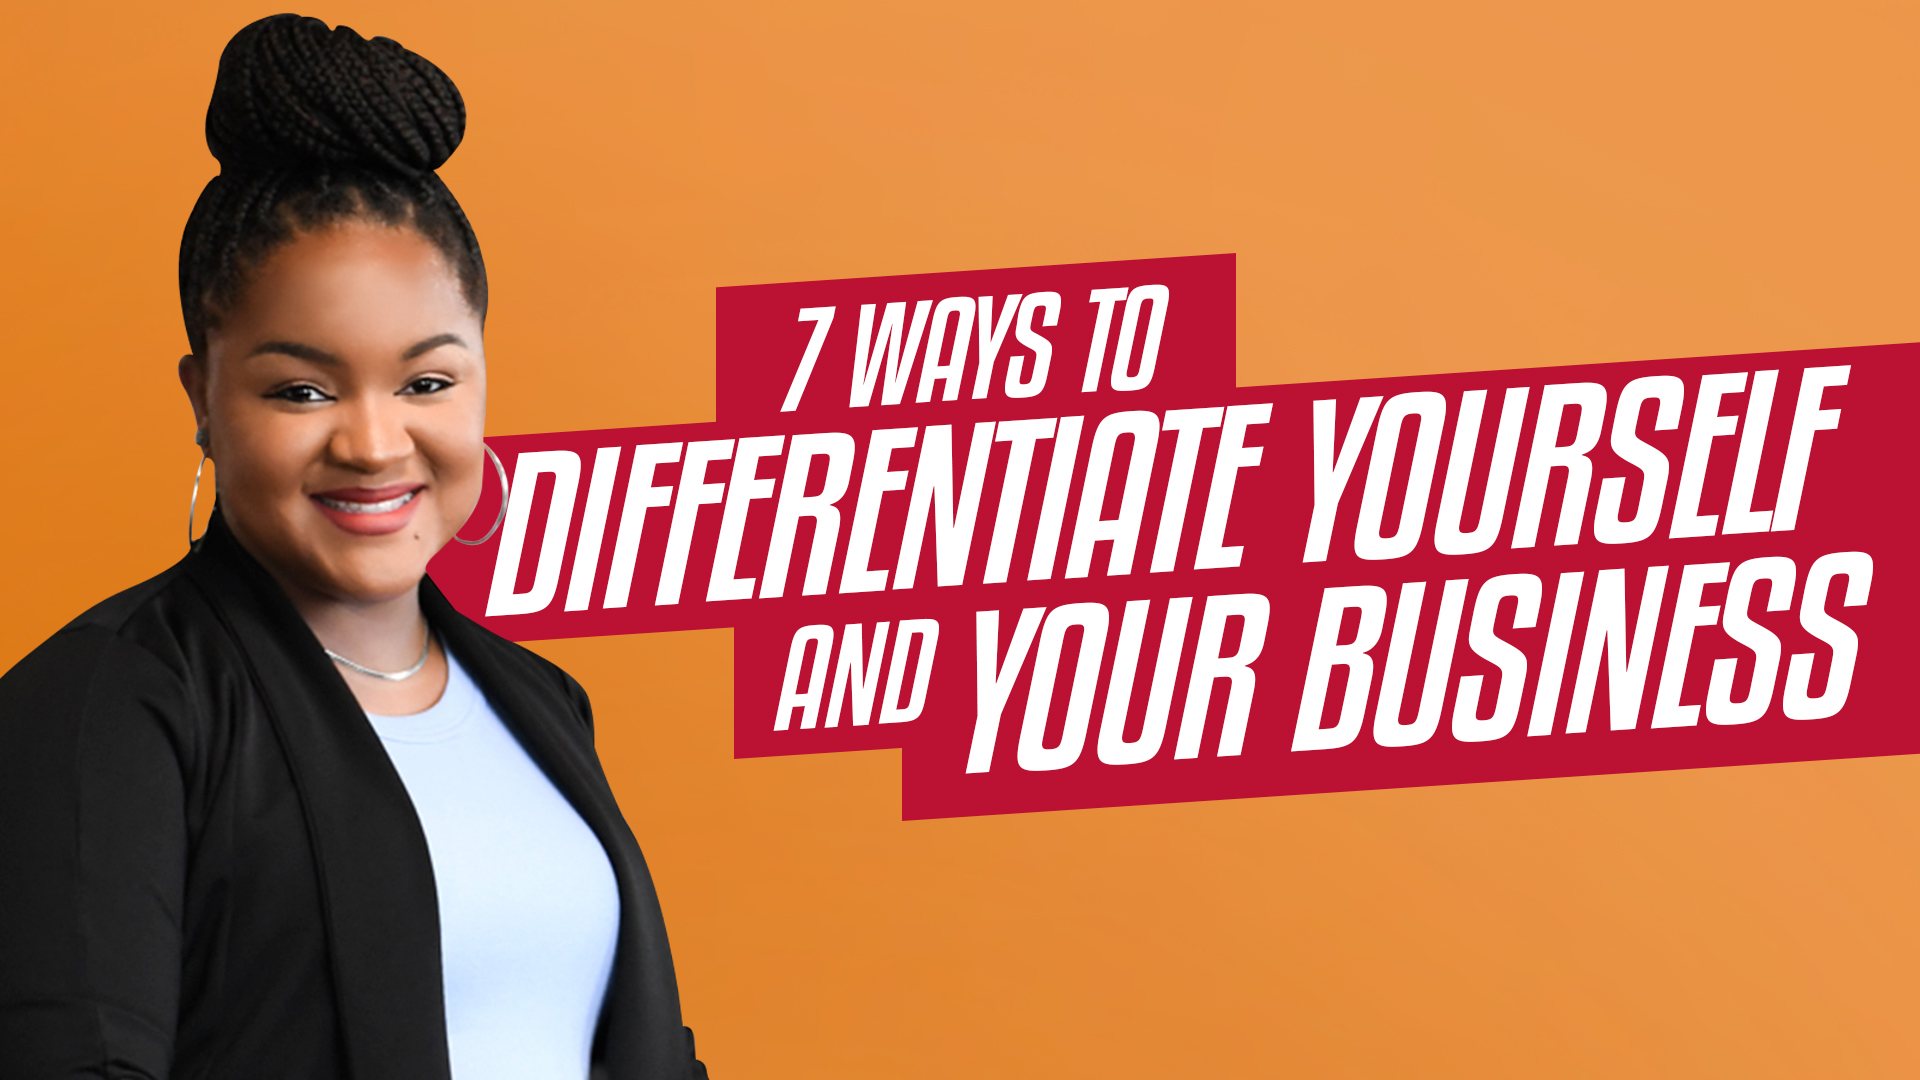 Episode #5: 7 Ways to Differentiate Yourself and Your Business